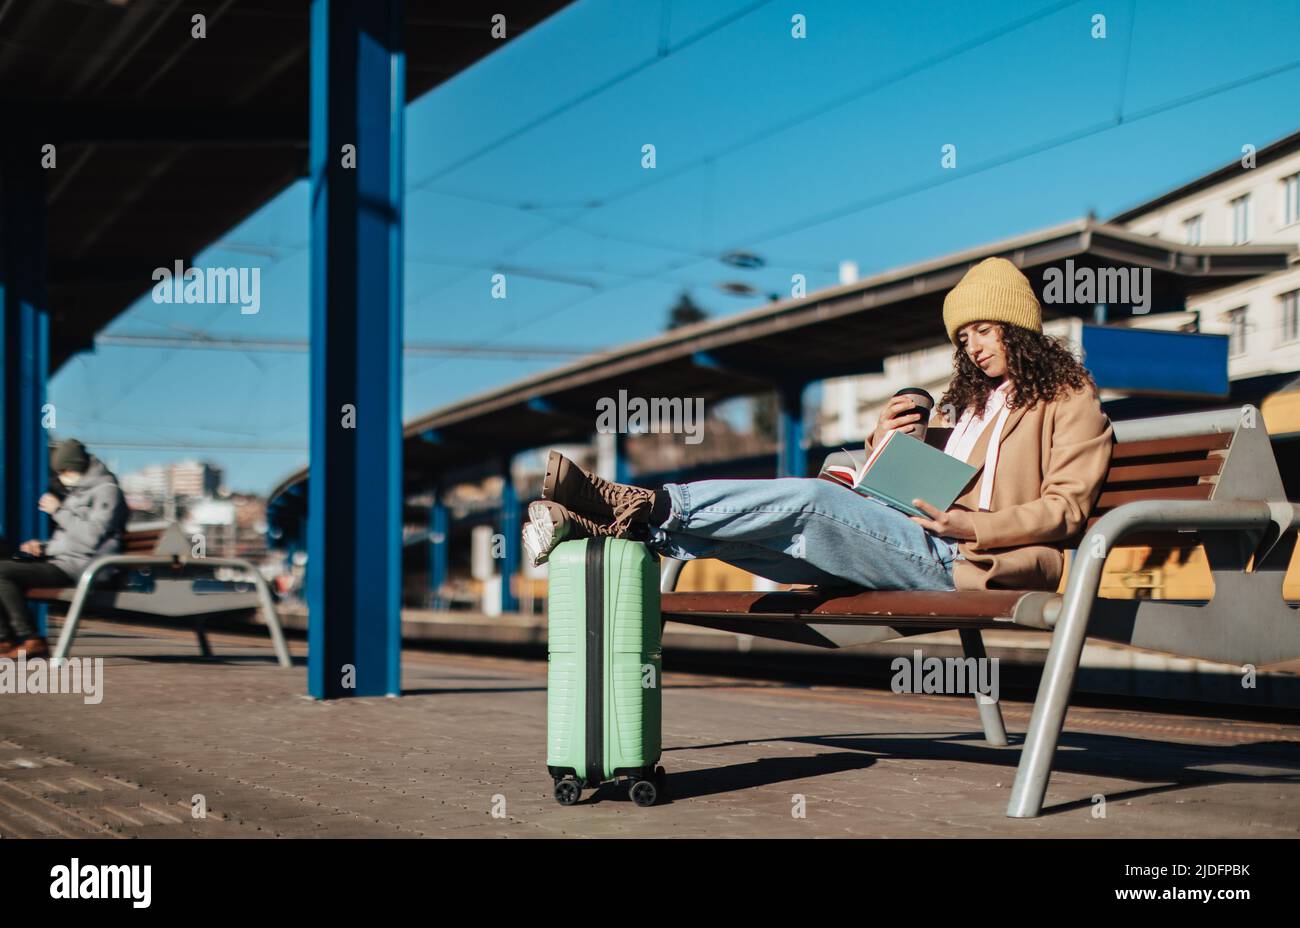 Young traveler woman sitting alone at train station platform with luggage. Stock Photo